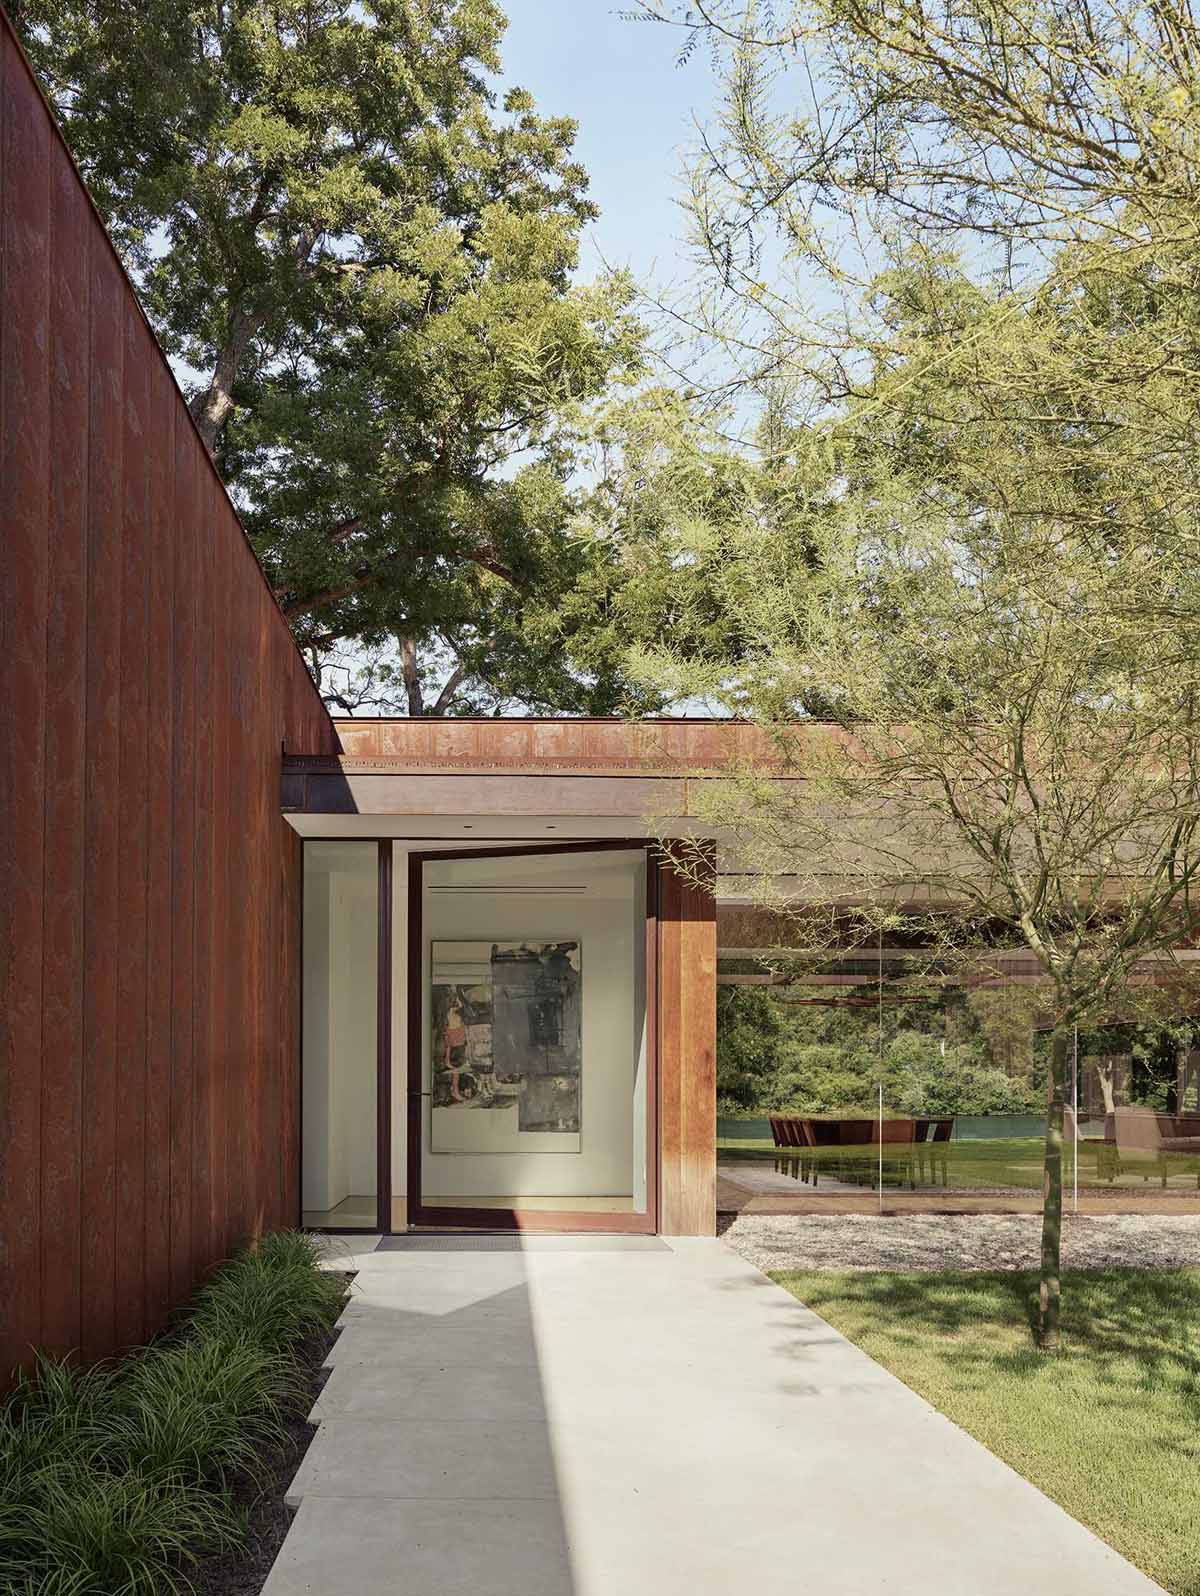 A path lined with Palo Verde trees leads to the entryway with a ten-foot-tall, pivoting glass front door.